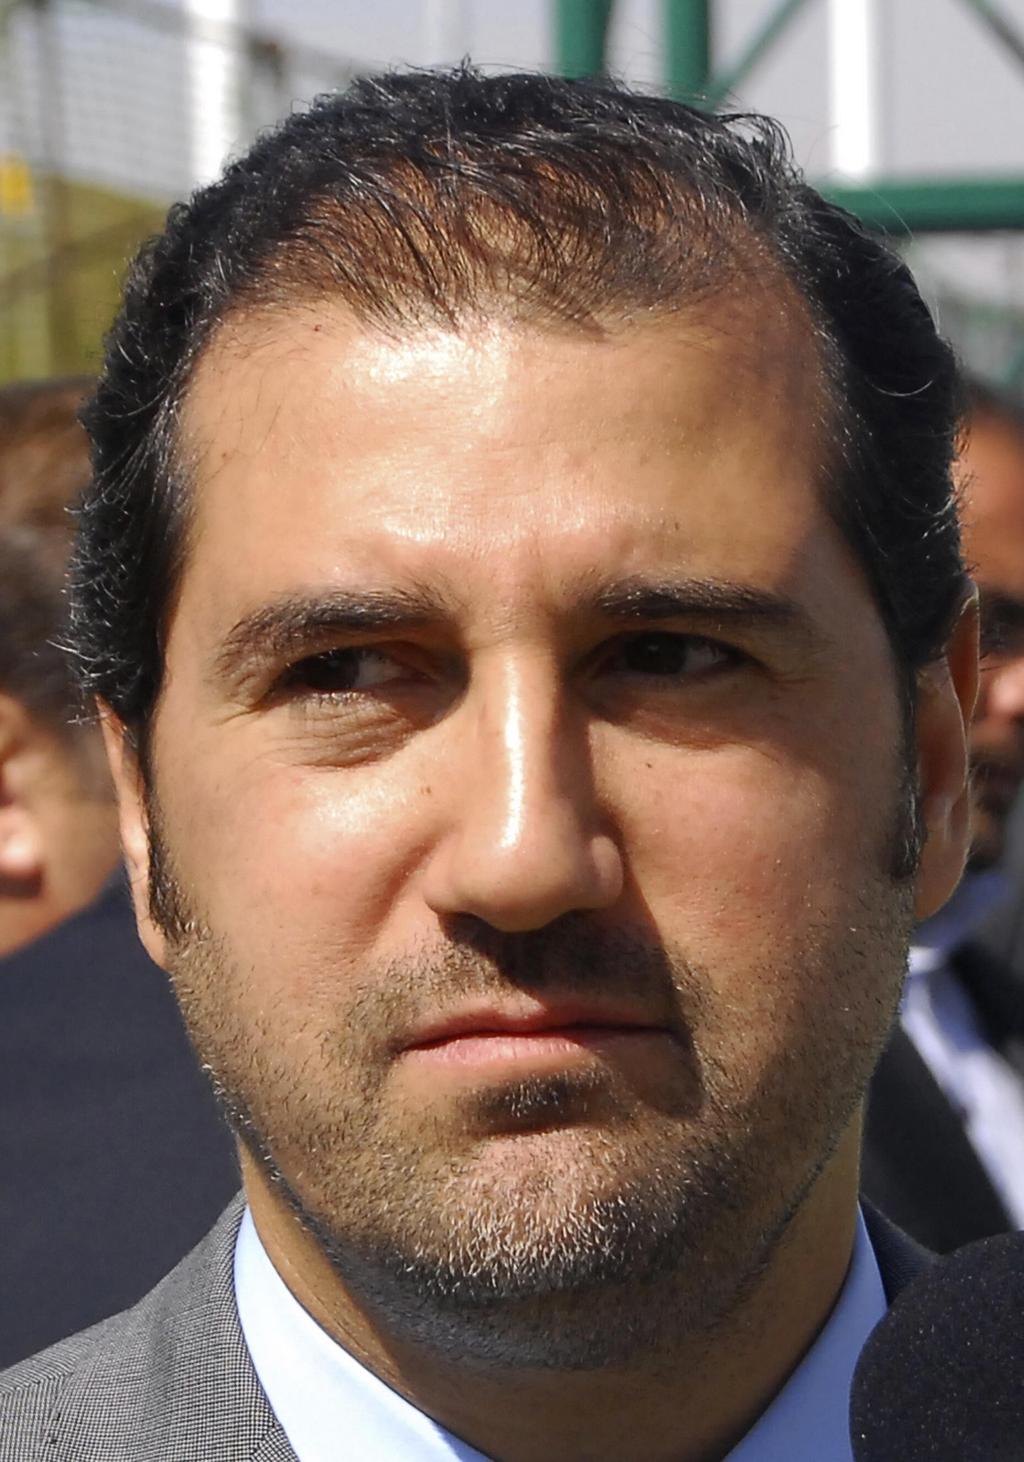 Rami Makhlouf, Assad's cousin and one of Syria's wealthiest businessman